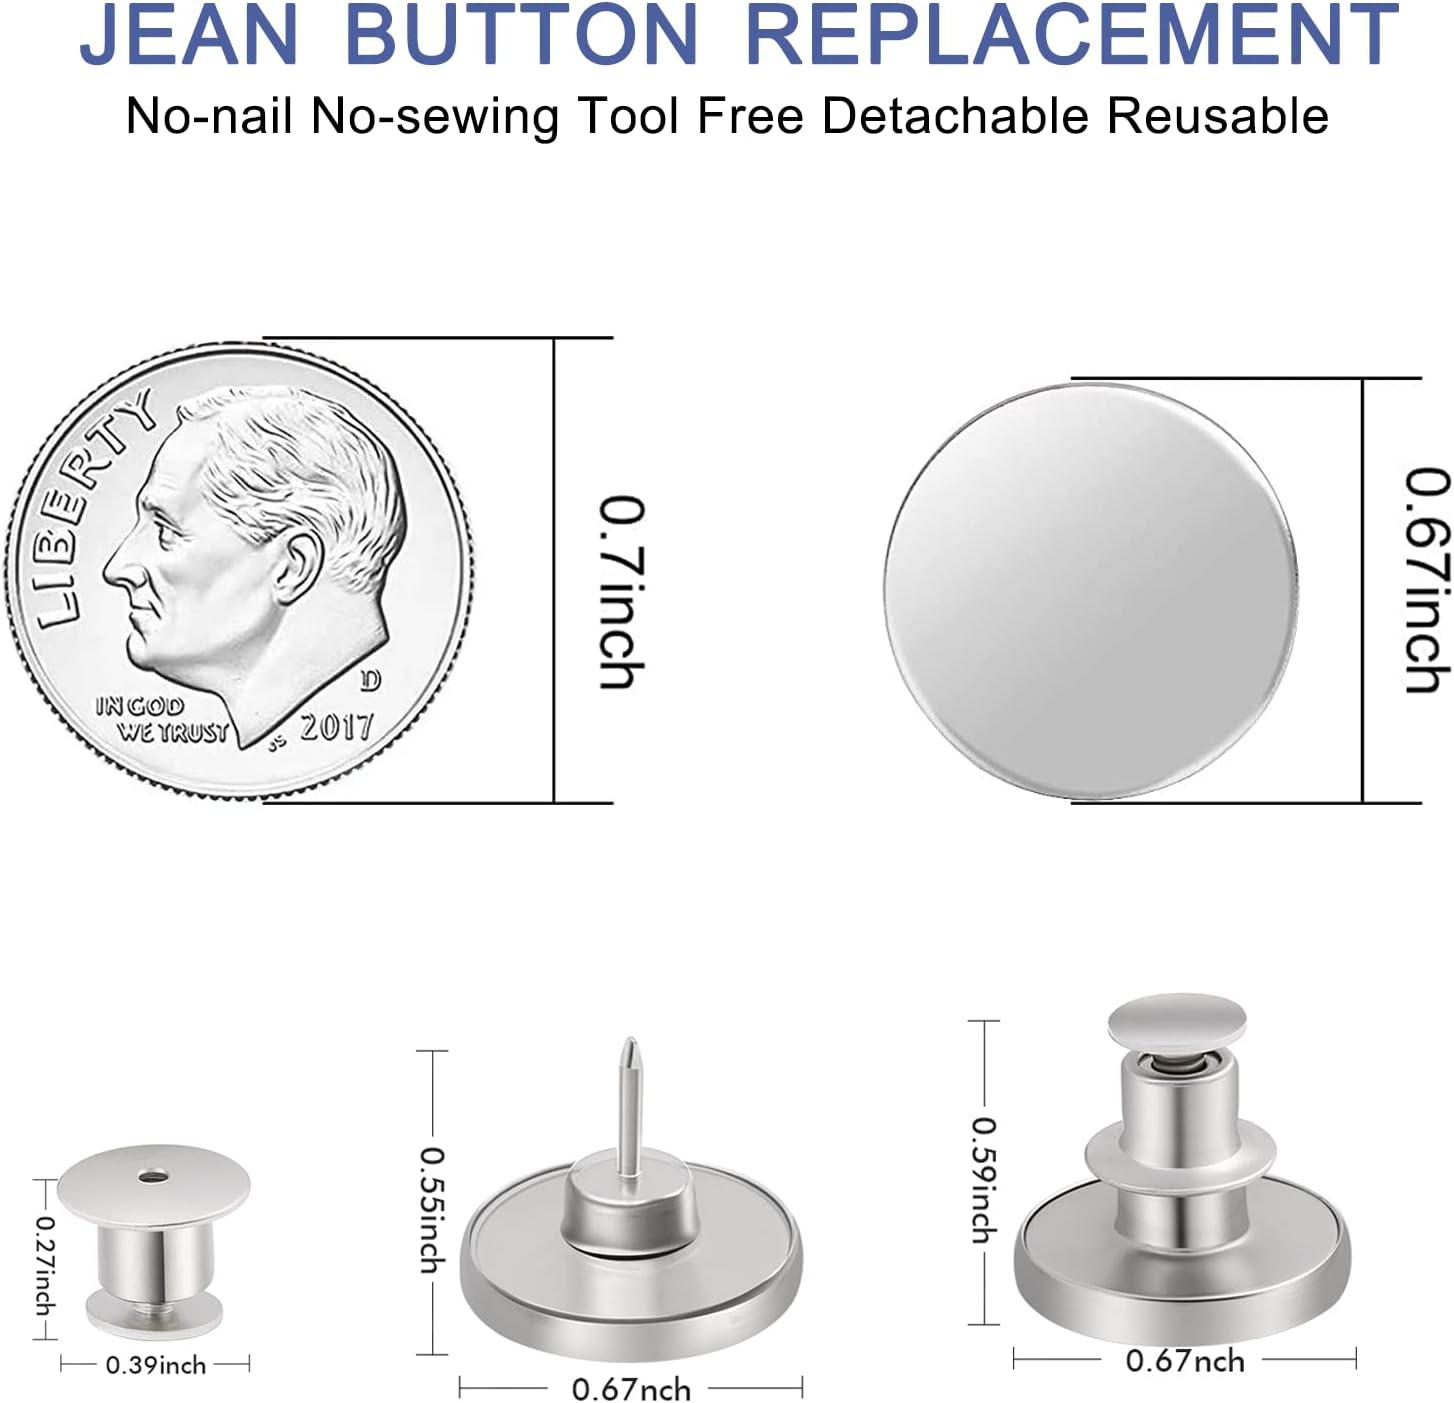 Nail-free Adjustable Snap Button With Rivets Set of 4 No-sew Waist